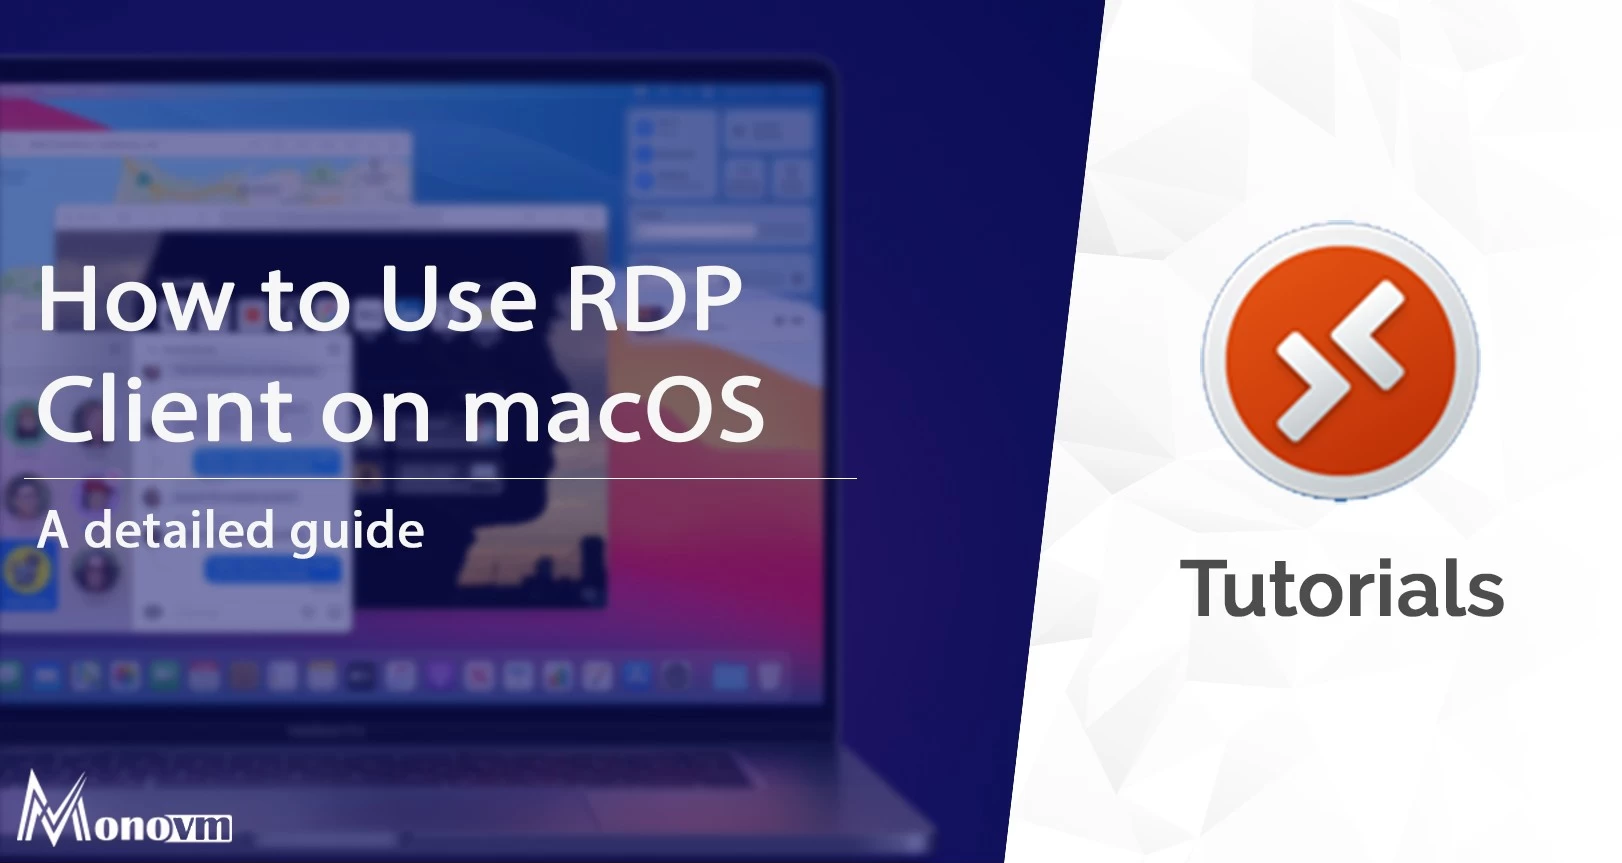 How to Use RDP Client for Mac? [RDP Client on macOS]